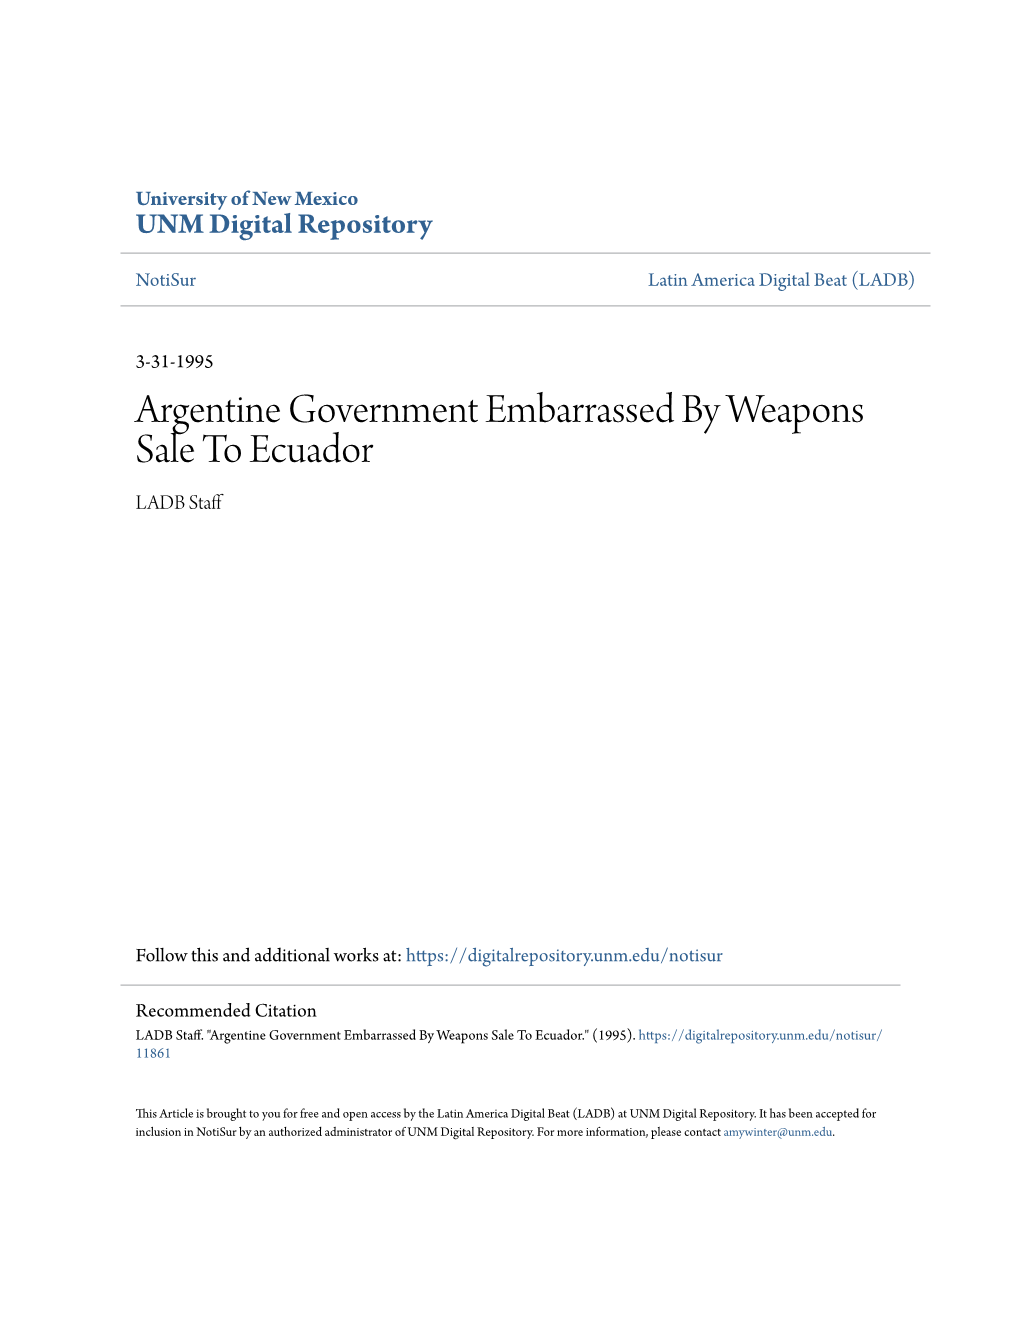 Argentine Government Embarrassed by Weapons Sale to Ecuador LADB Staff